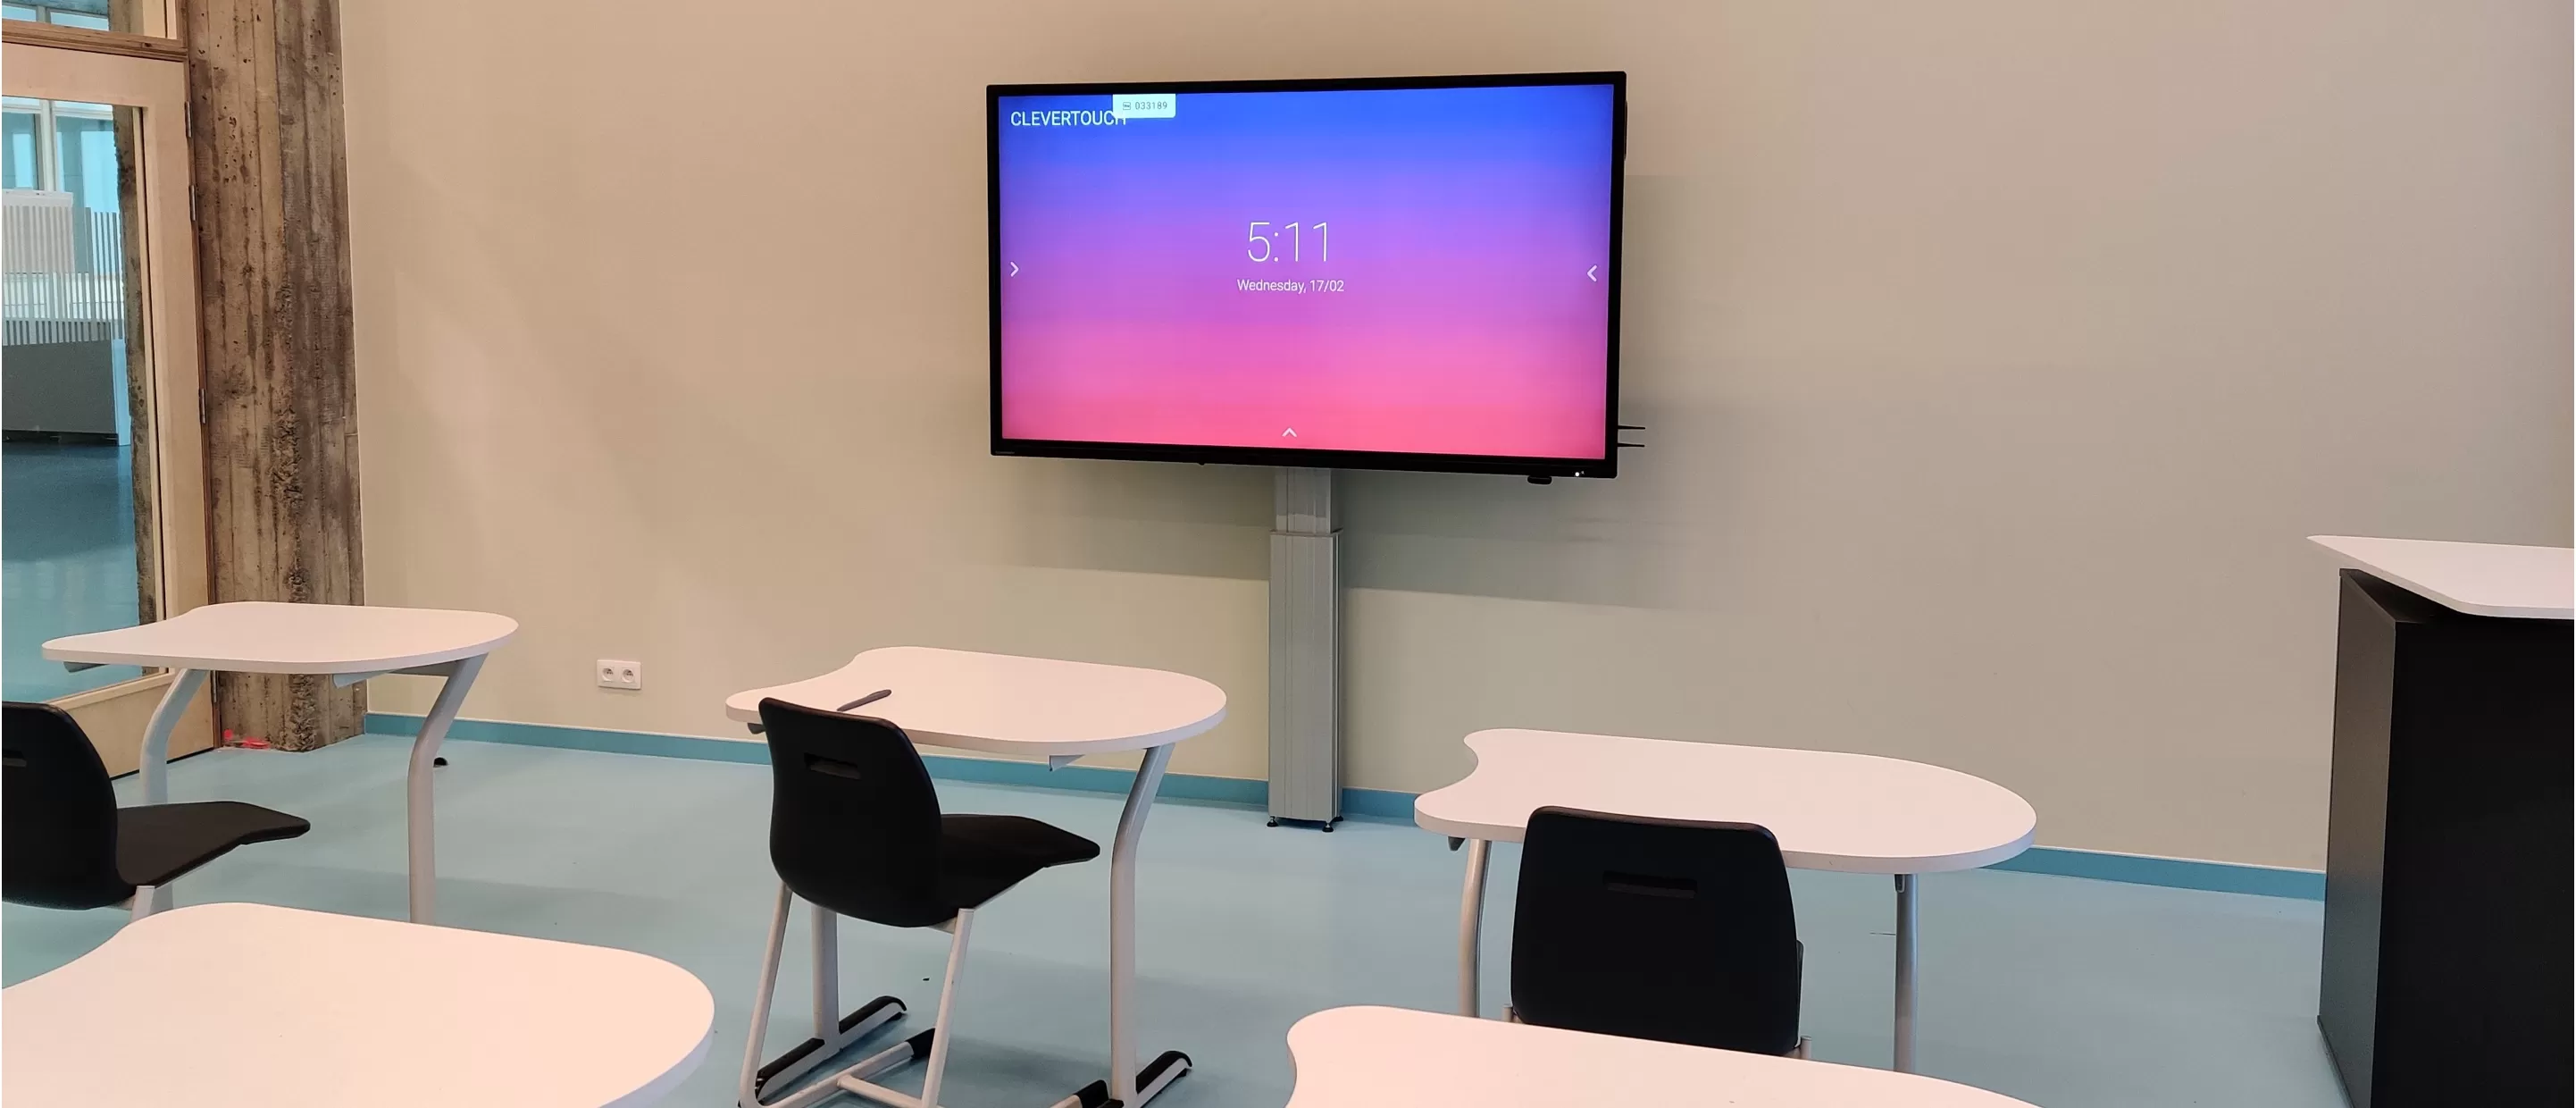 Clevertouch IMPACT on a standing in a classroom